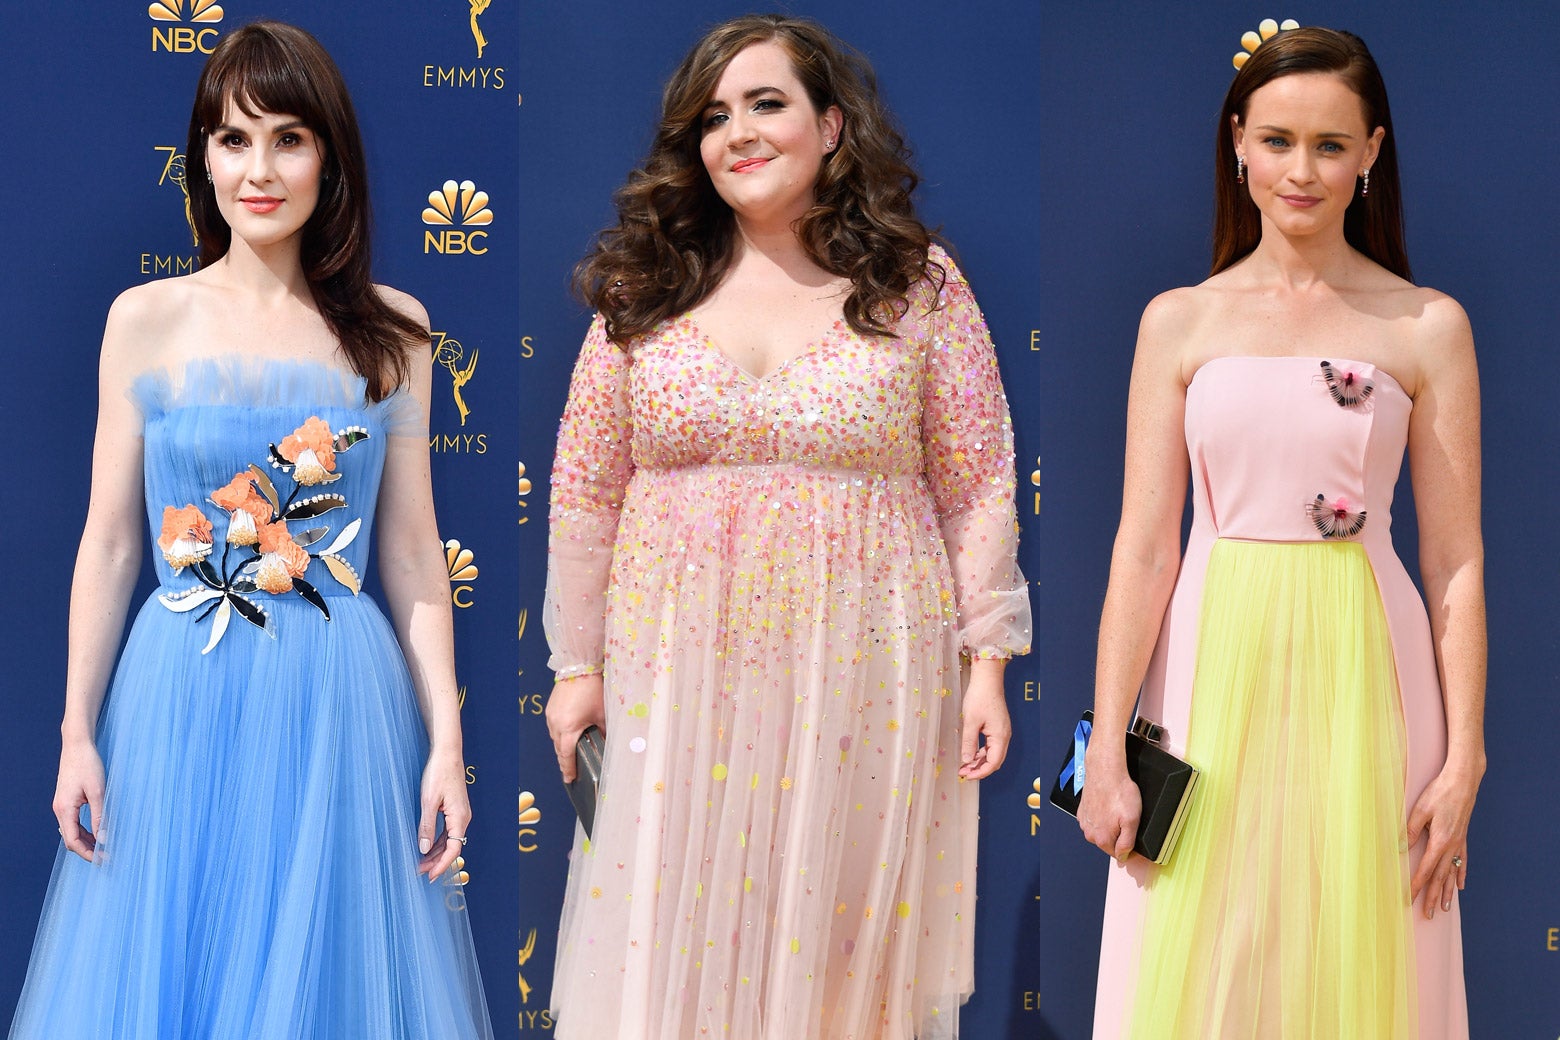 Michelle Dockery, Aidy Bryant, and Alexis Bledel.